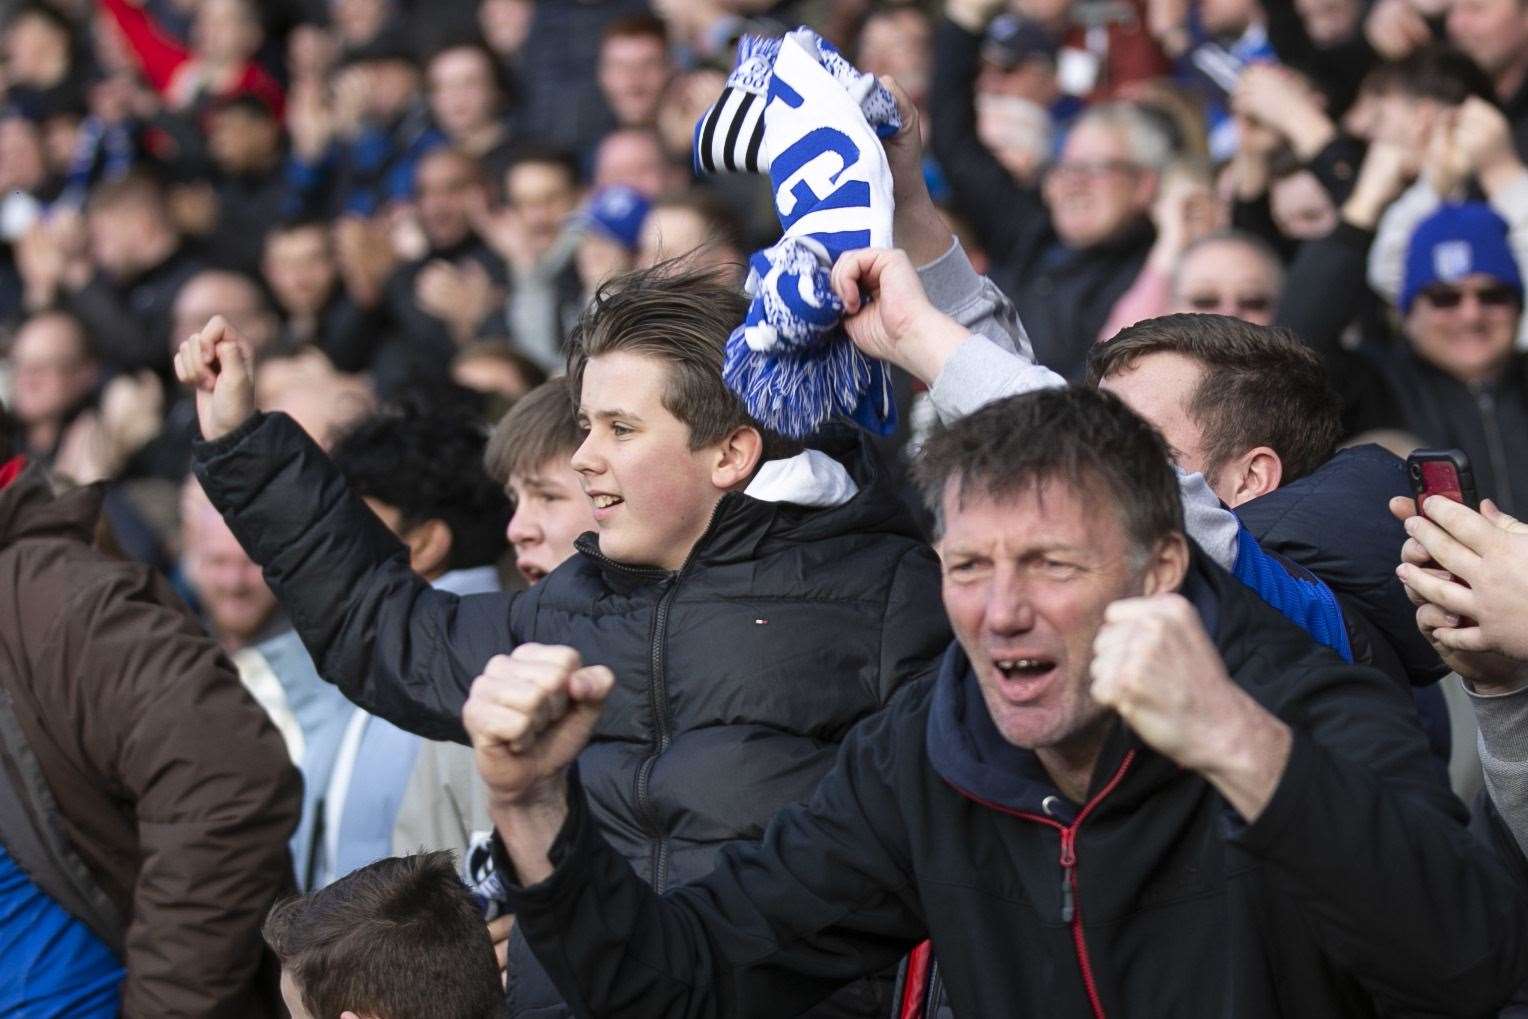 Fans celebrate at Priestfield as Gillingham beat Carlisle in injury-time